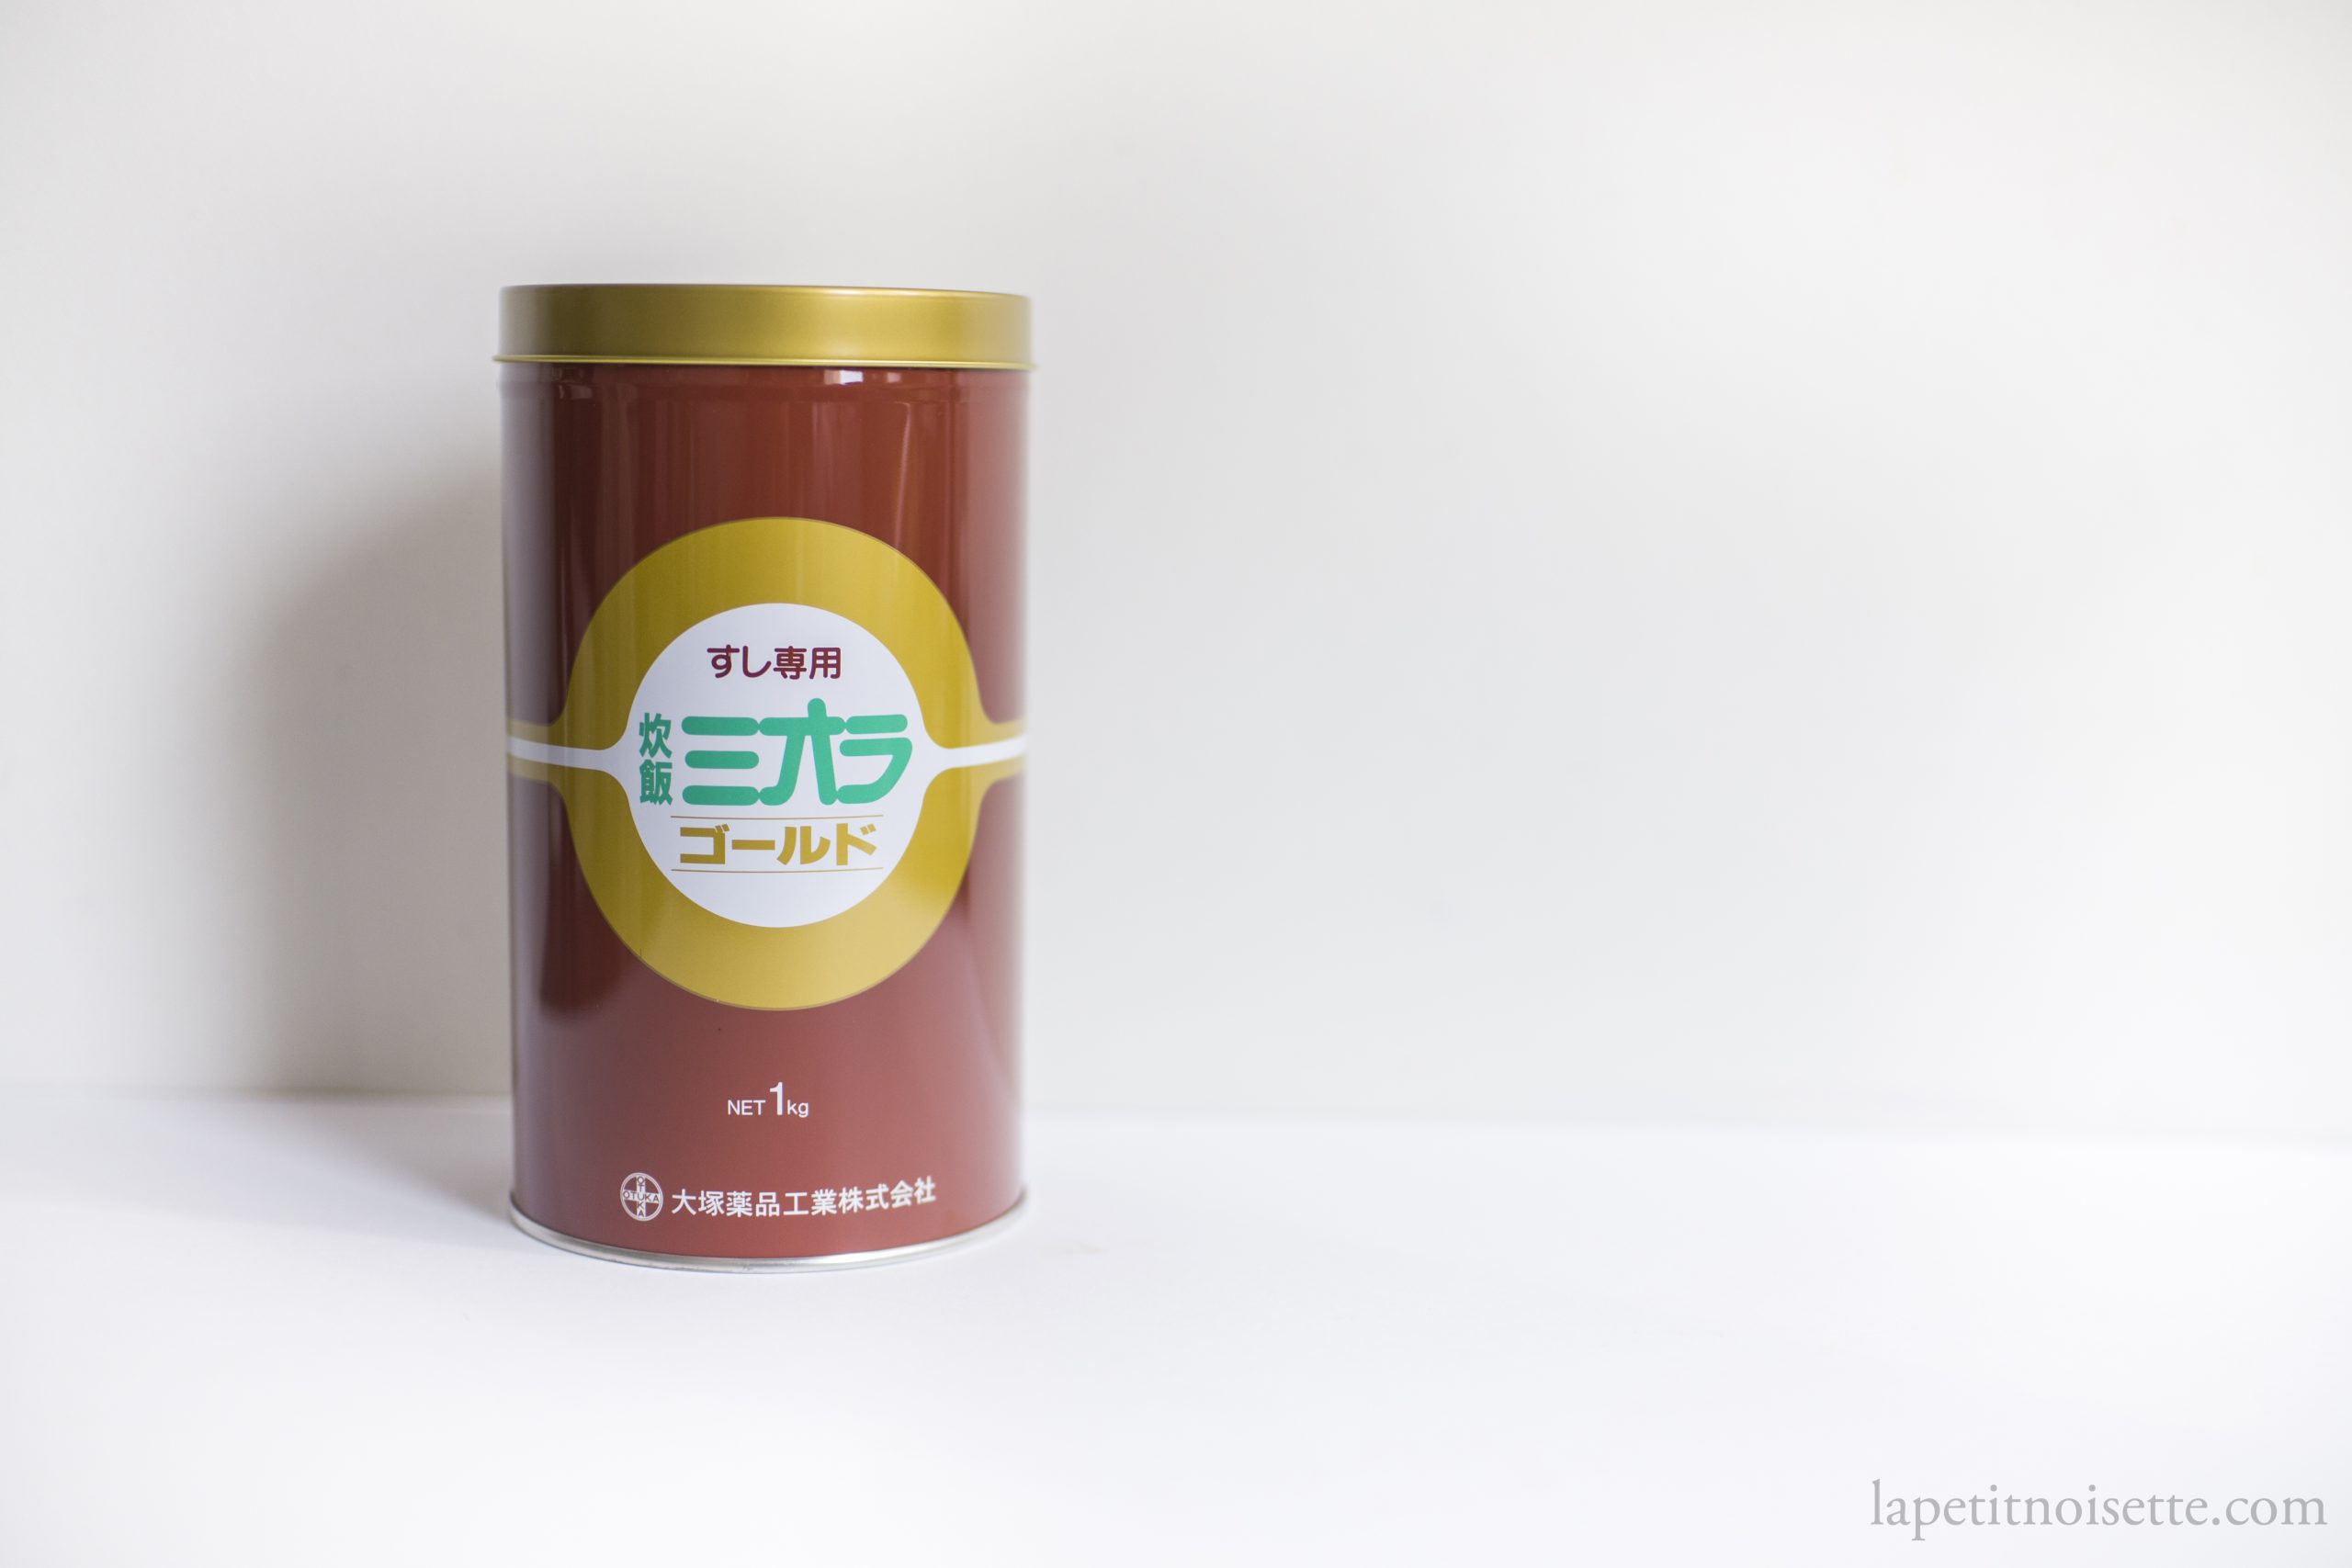 A restaurant sized can of sushi rice Miola improver.